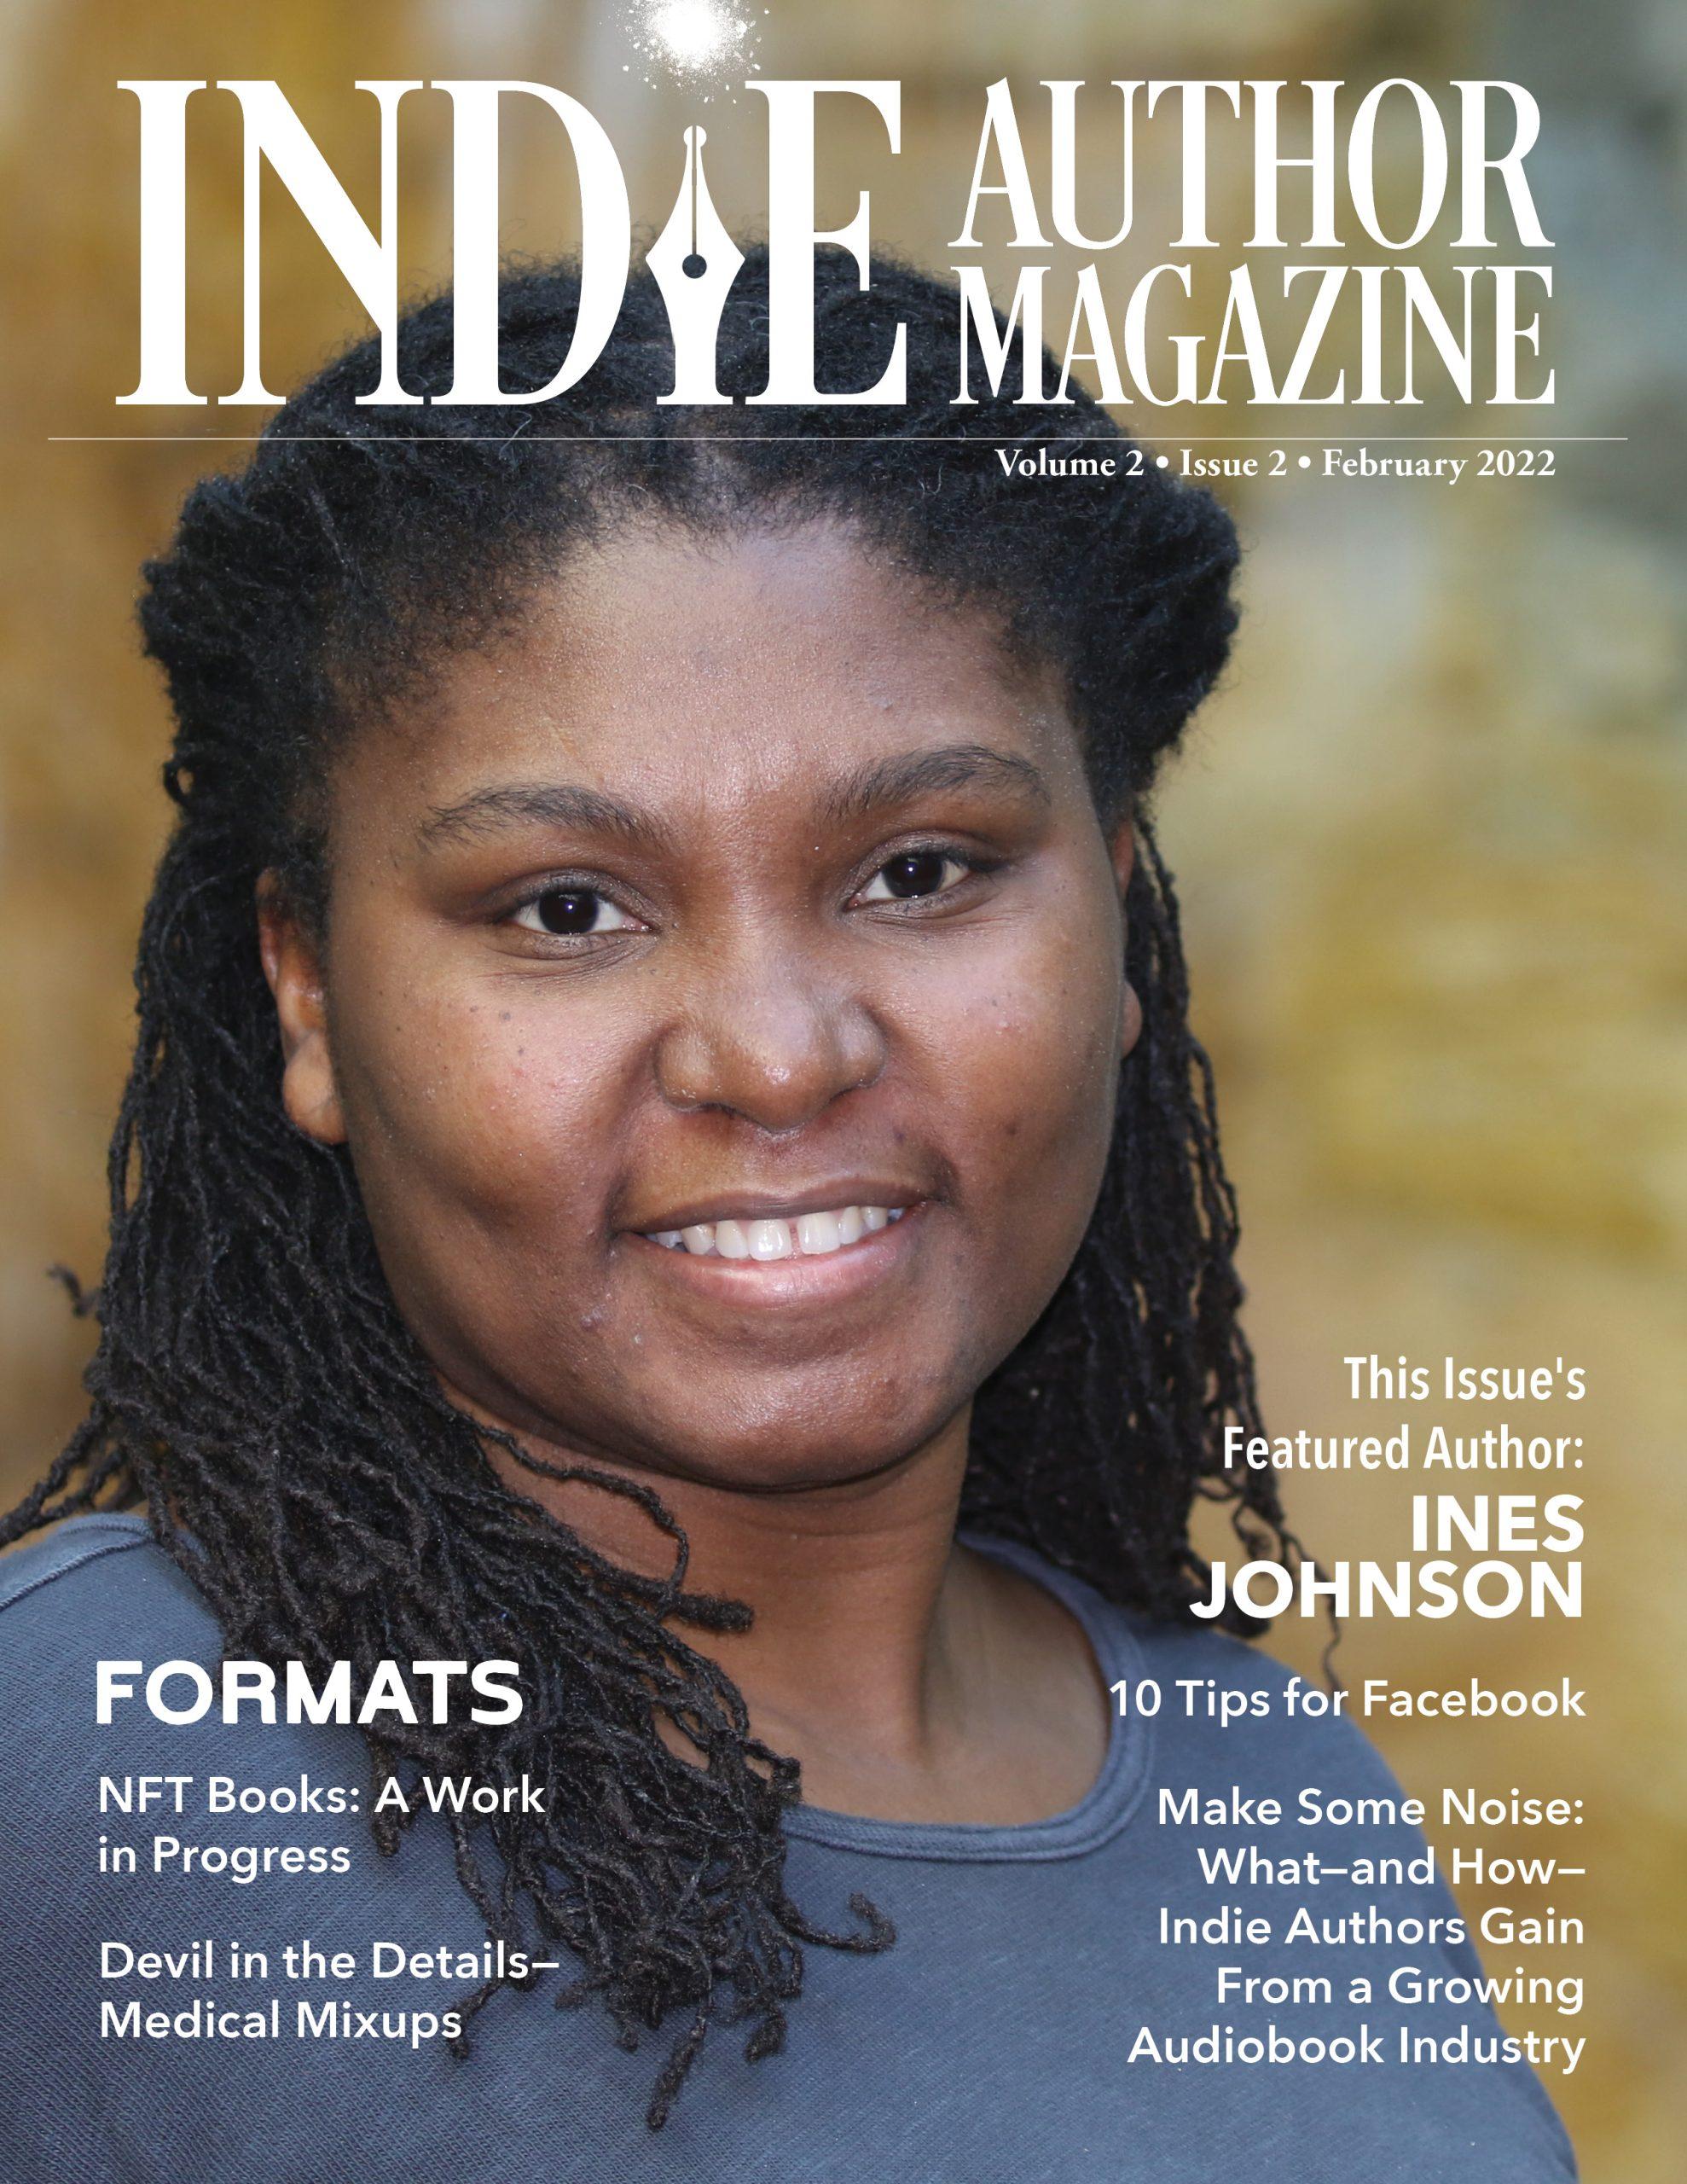 Ines Johnson on the Cover of Indie Author Magazine February 2022